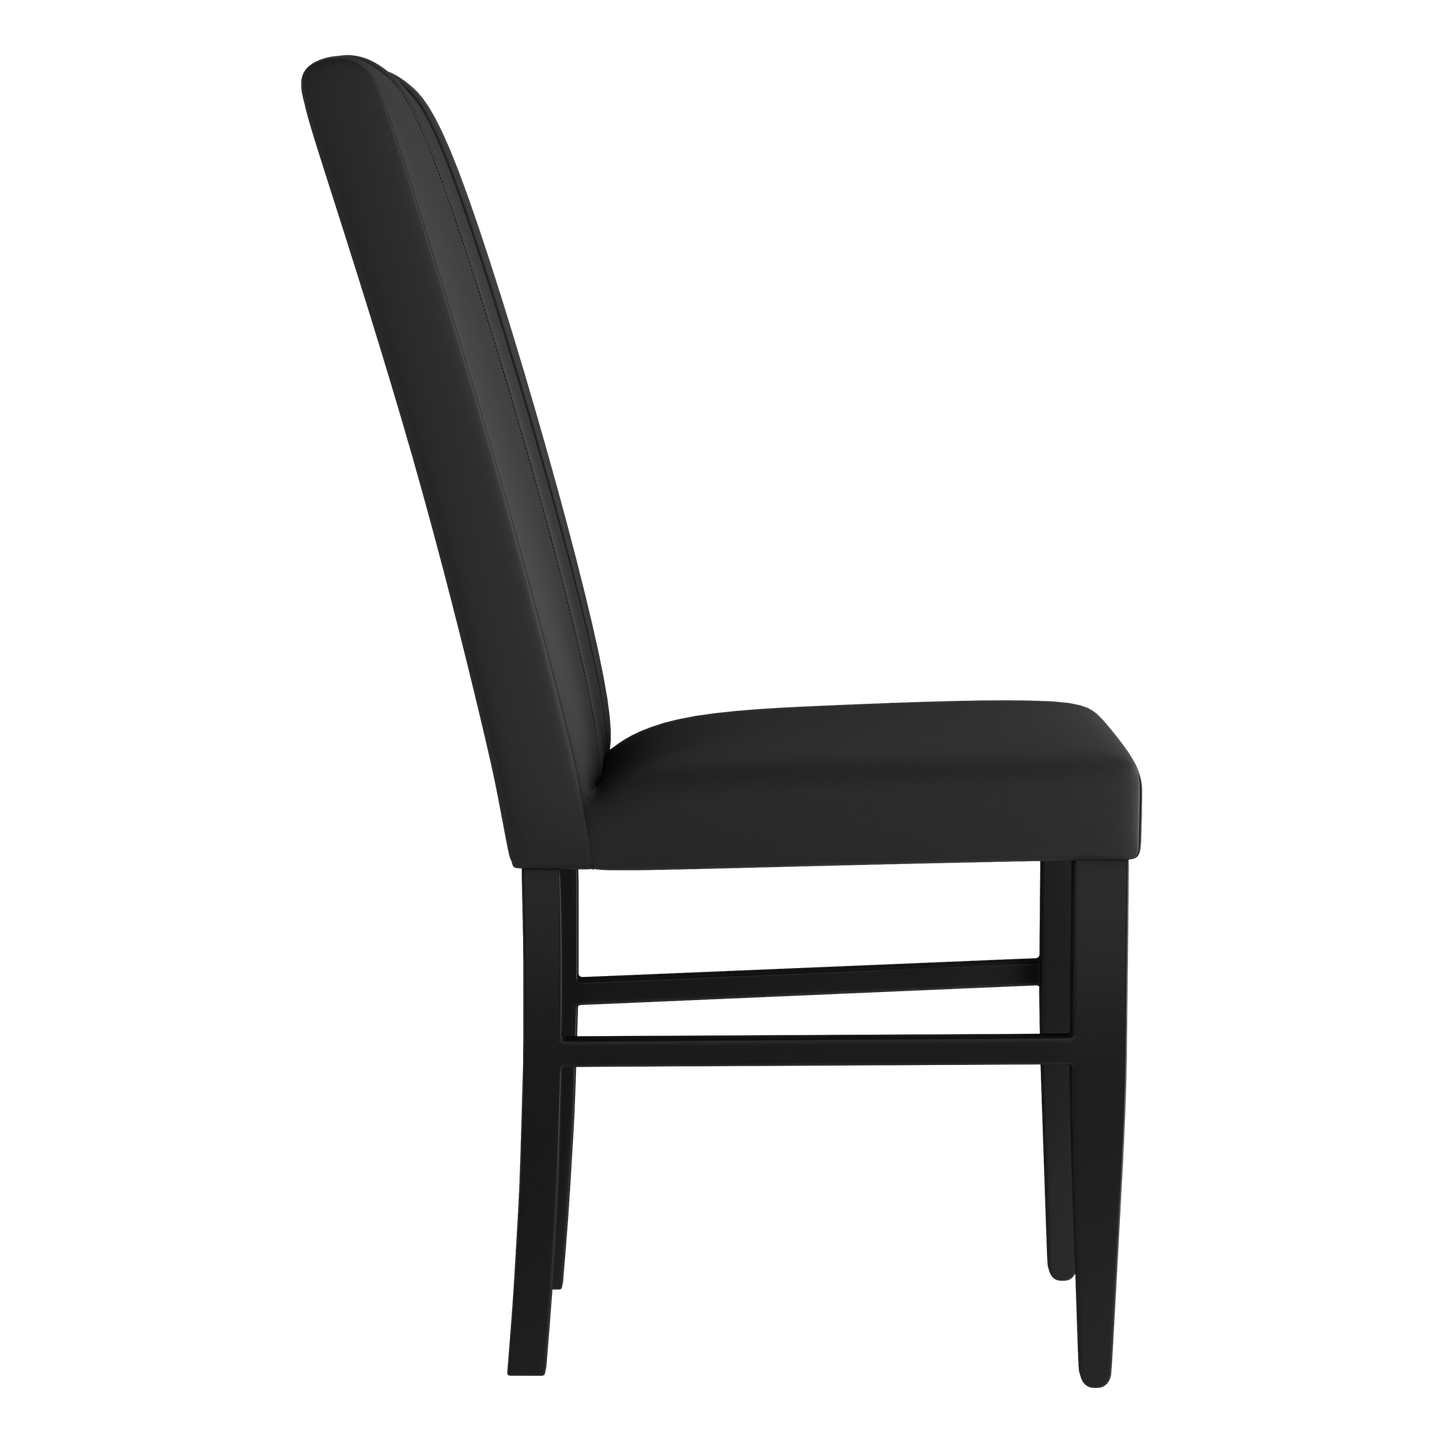 Side Chair 2000 with GMC Primary Logo Set of 2